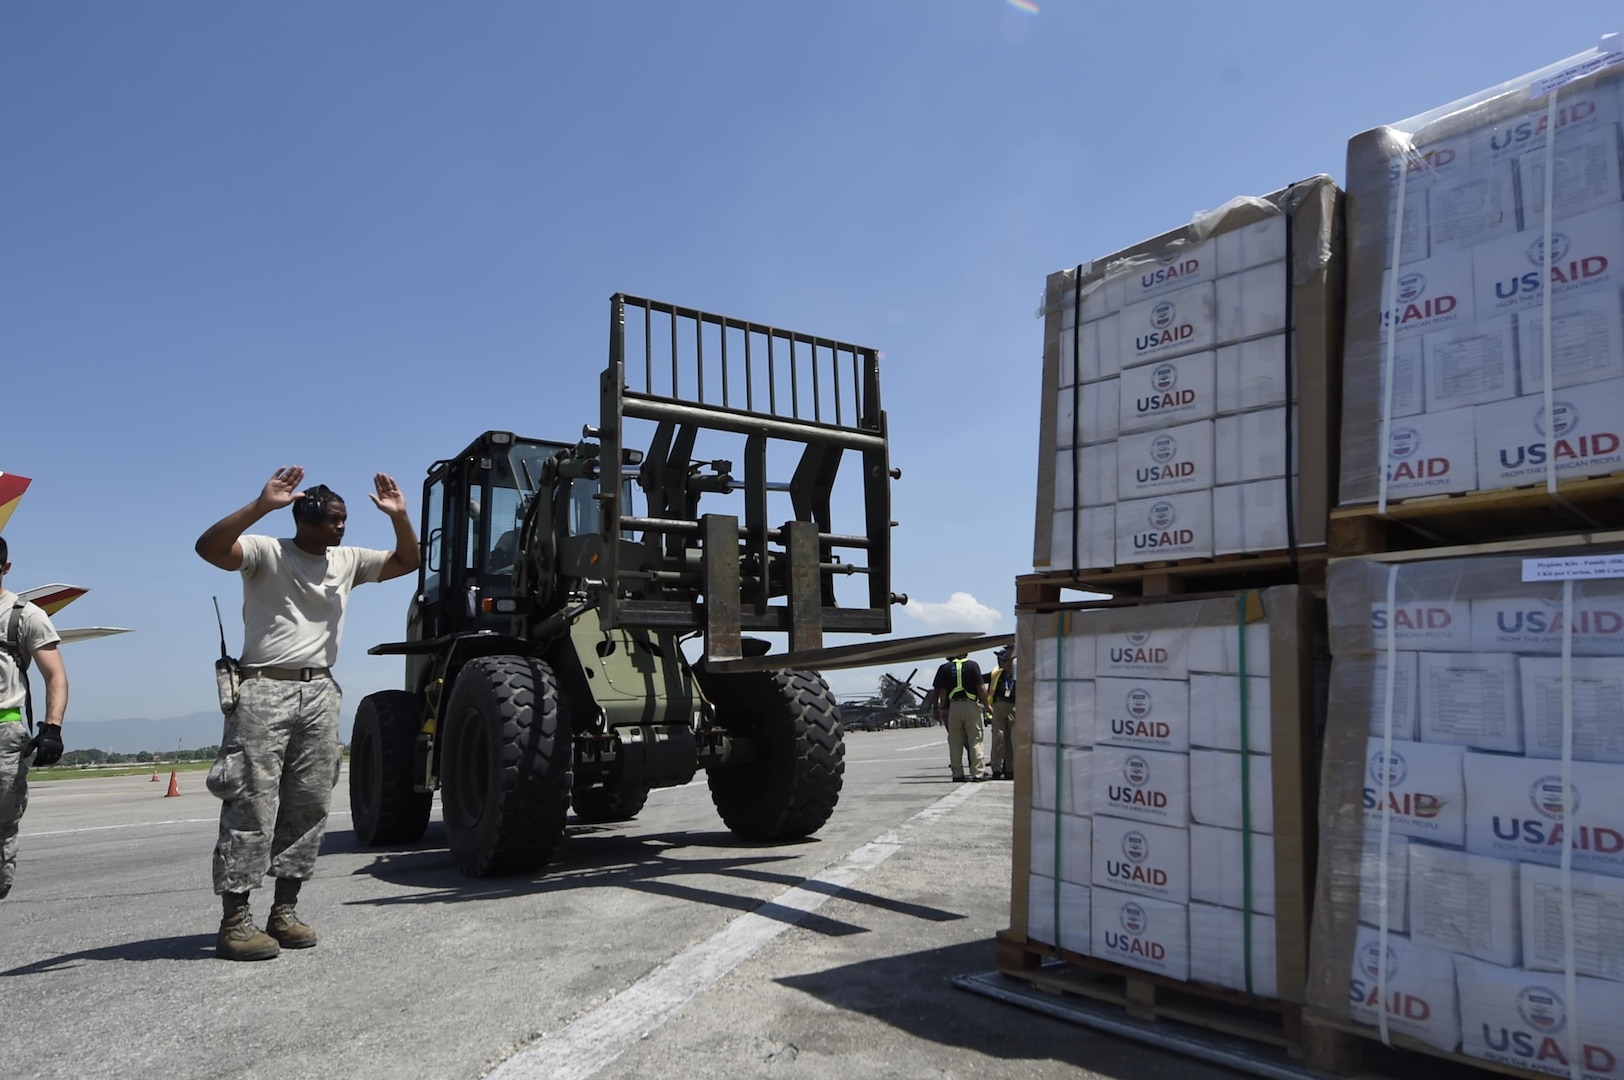 Tech. Sgt. Ronald Rowe, 621st Contingency Response Wing, facilitates transport of USAID food and provisions for Hurricane victims in Haiti, October 9th, 2016, Port-Au-Prince, Haiti. The CRW has units ready to deploy anywhere in the world in support of emergency operations, within 12 hours of notification.(U.S. Air Force photo by Staff Sgt. Robert Waggoner/released)